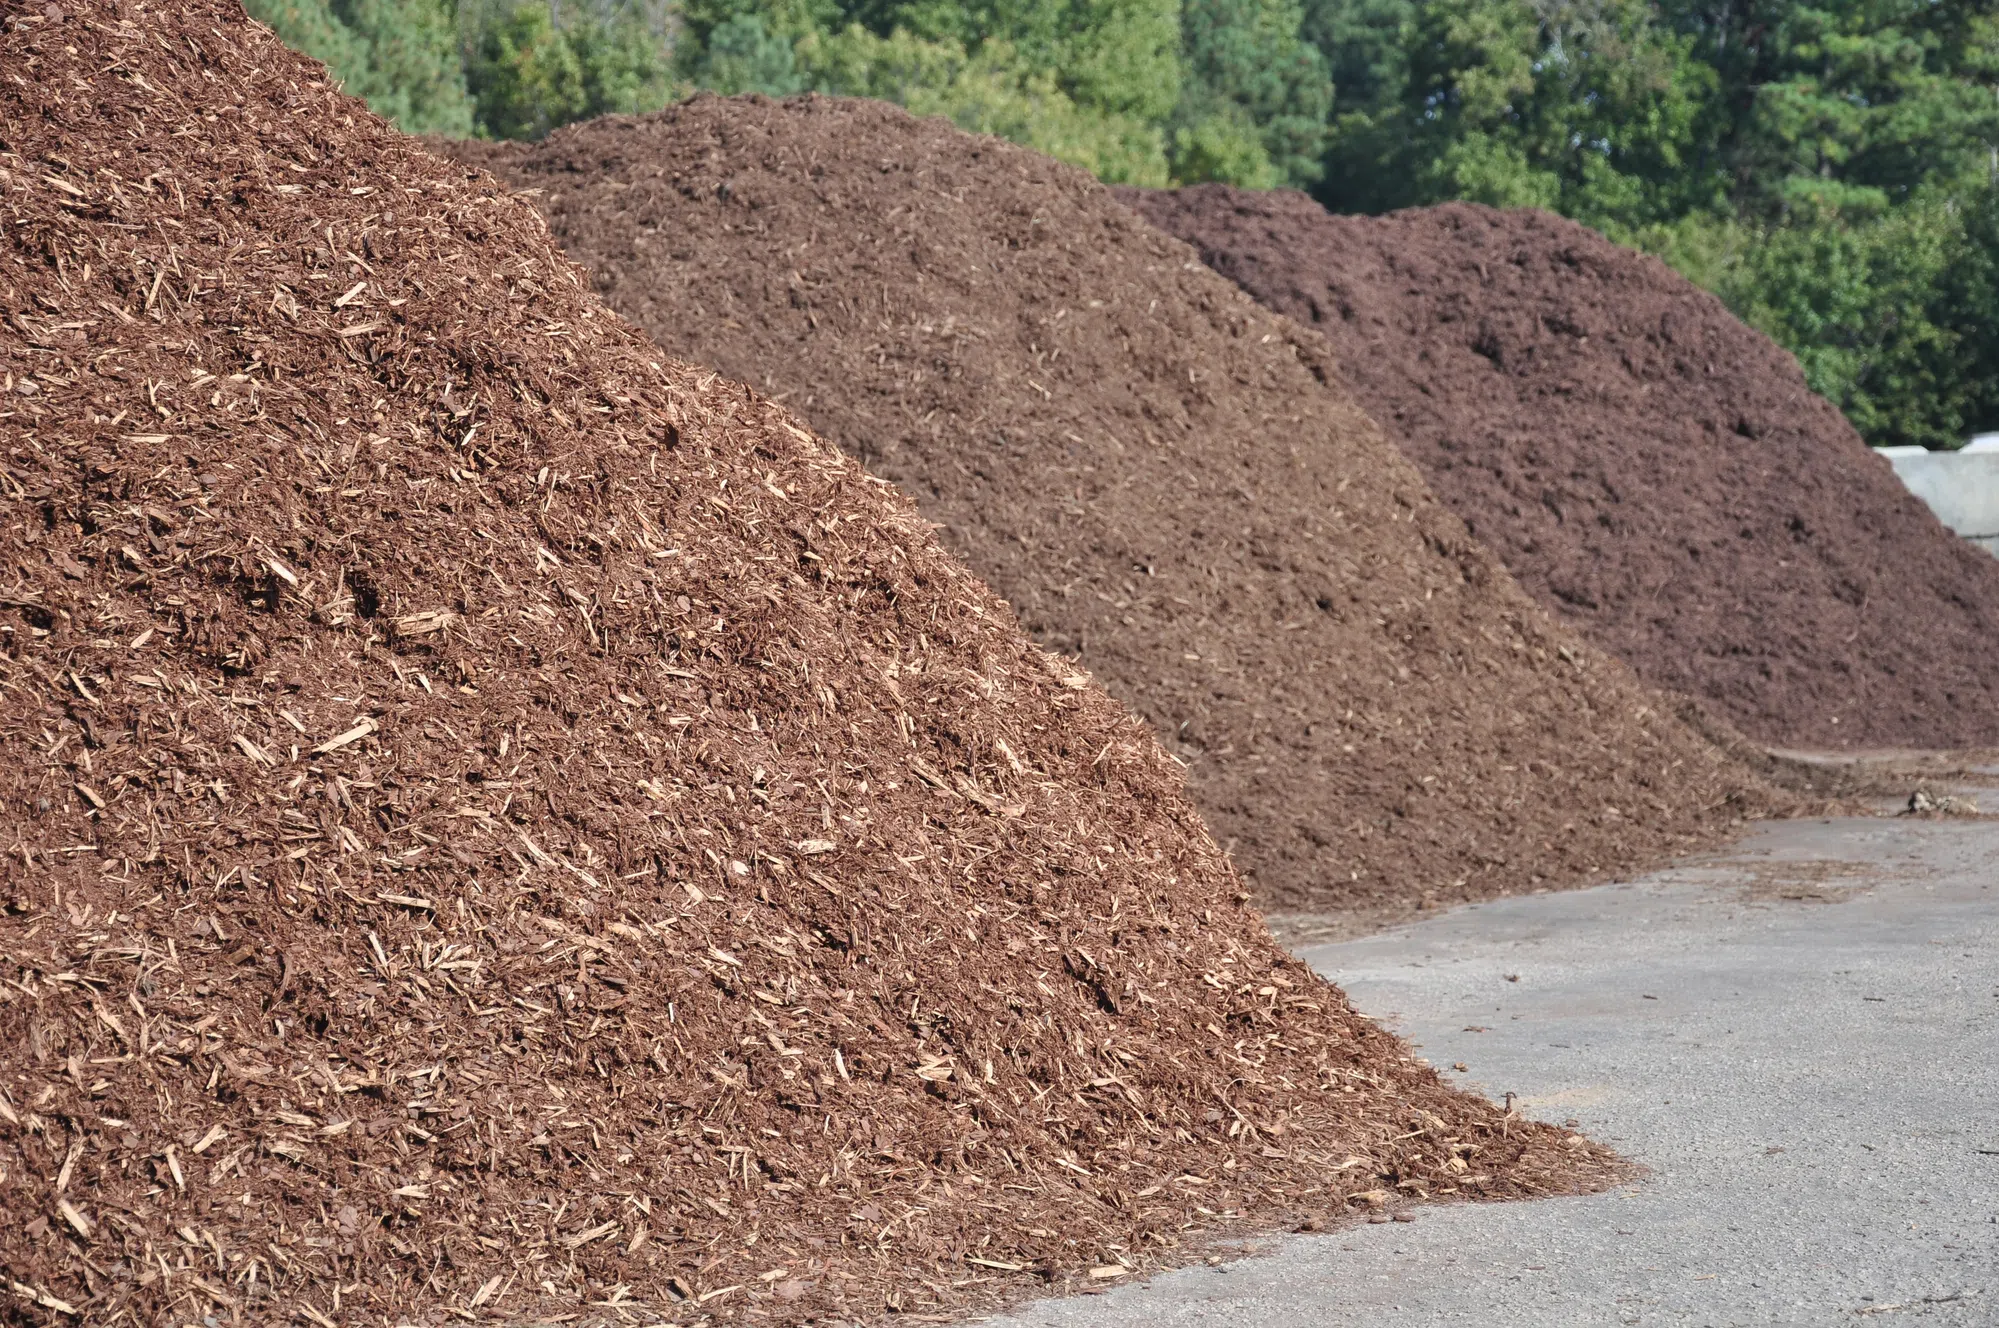 Free compost available at Solid Waste and Recycling Facility